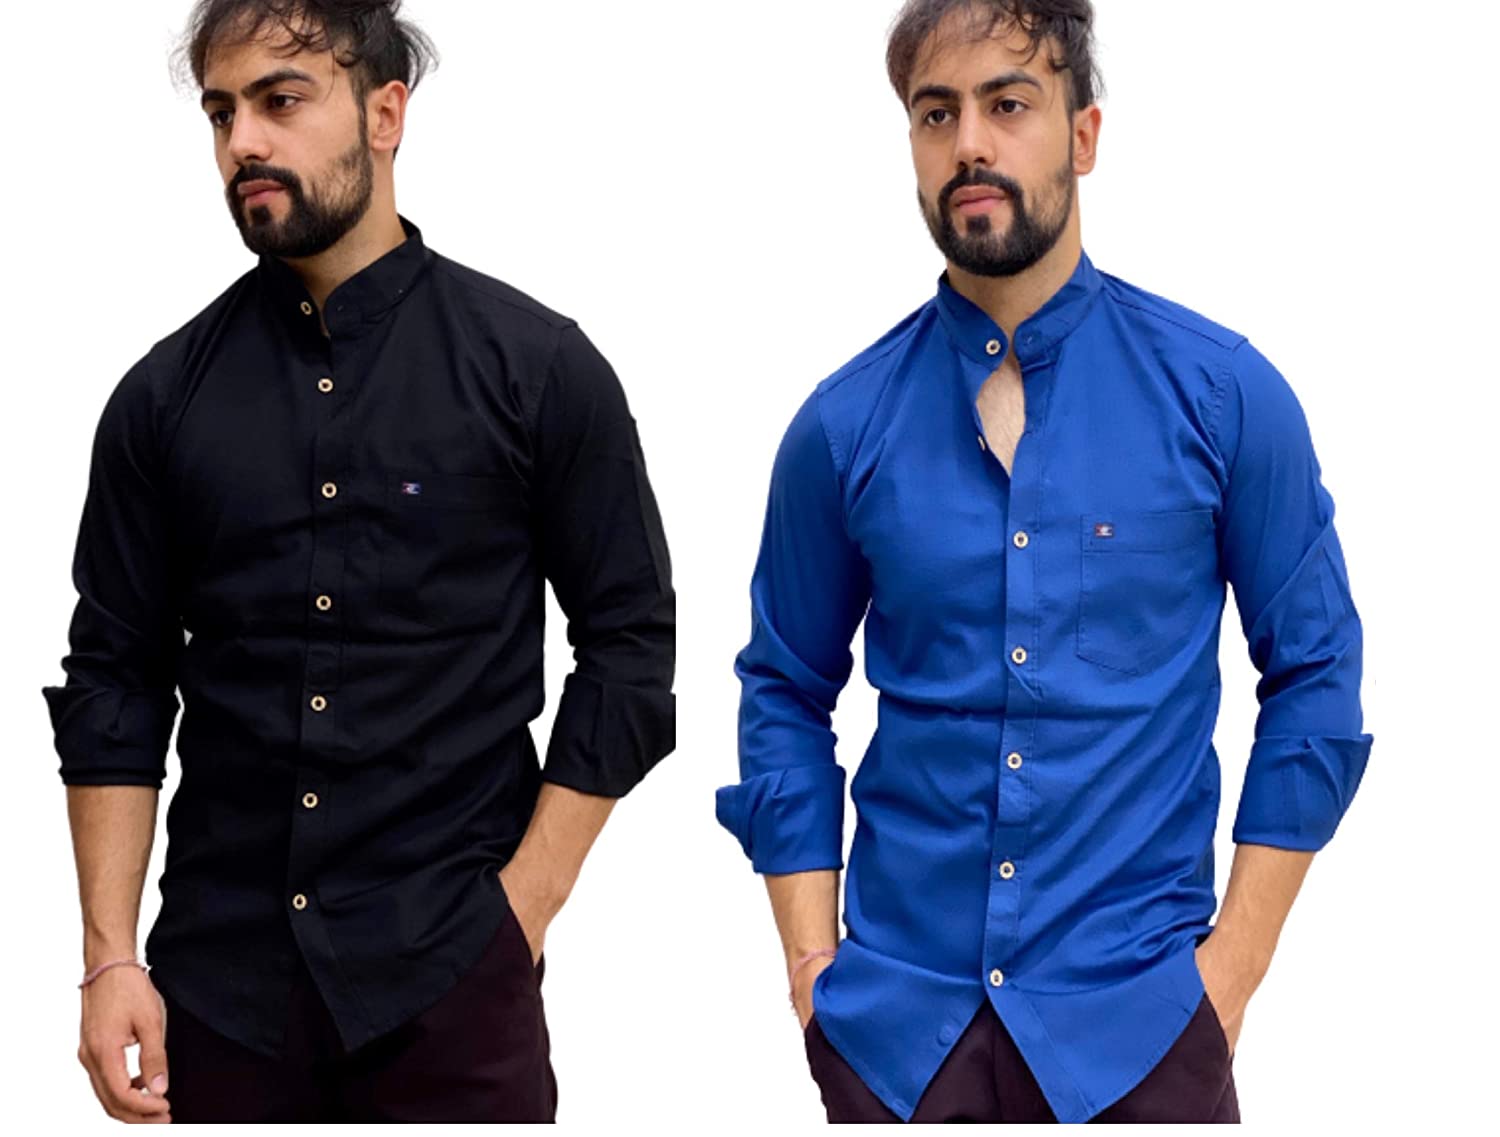 The Trendsetting Ways to Fashion Check Shirts for Men